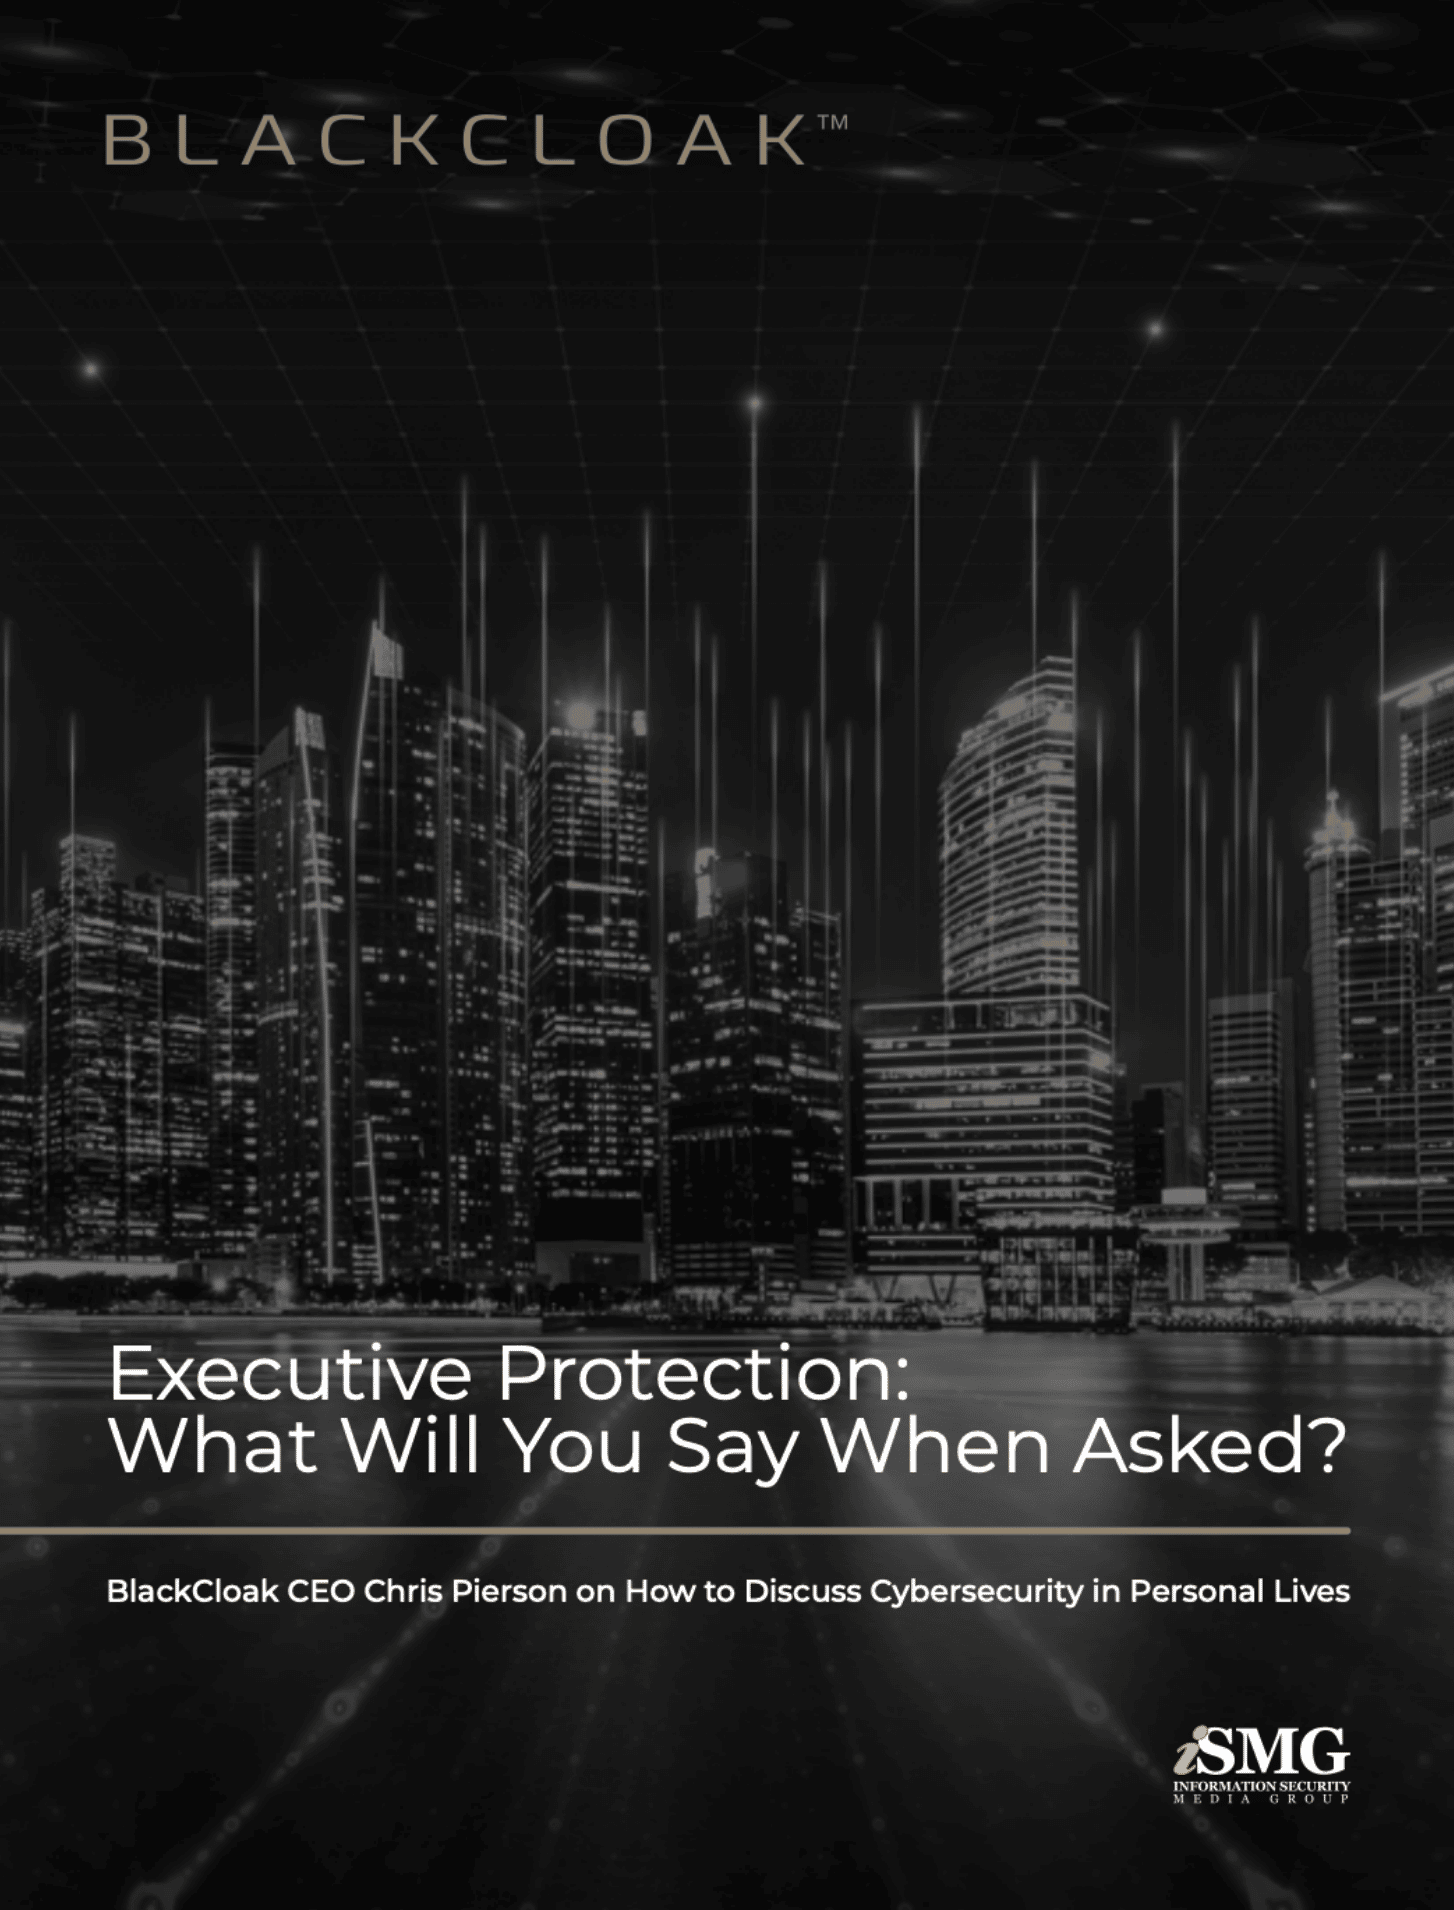 Executive protection - what to say when asked